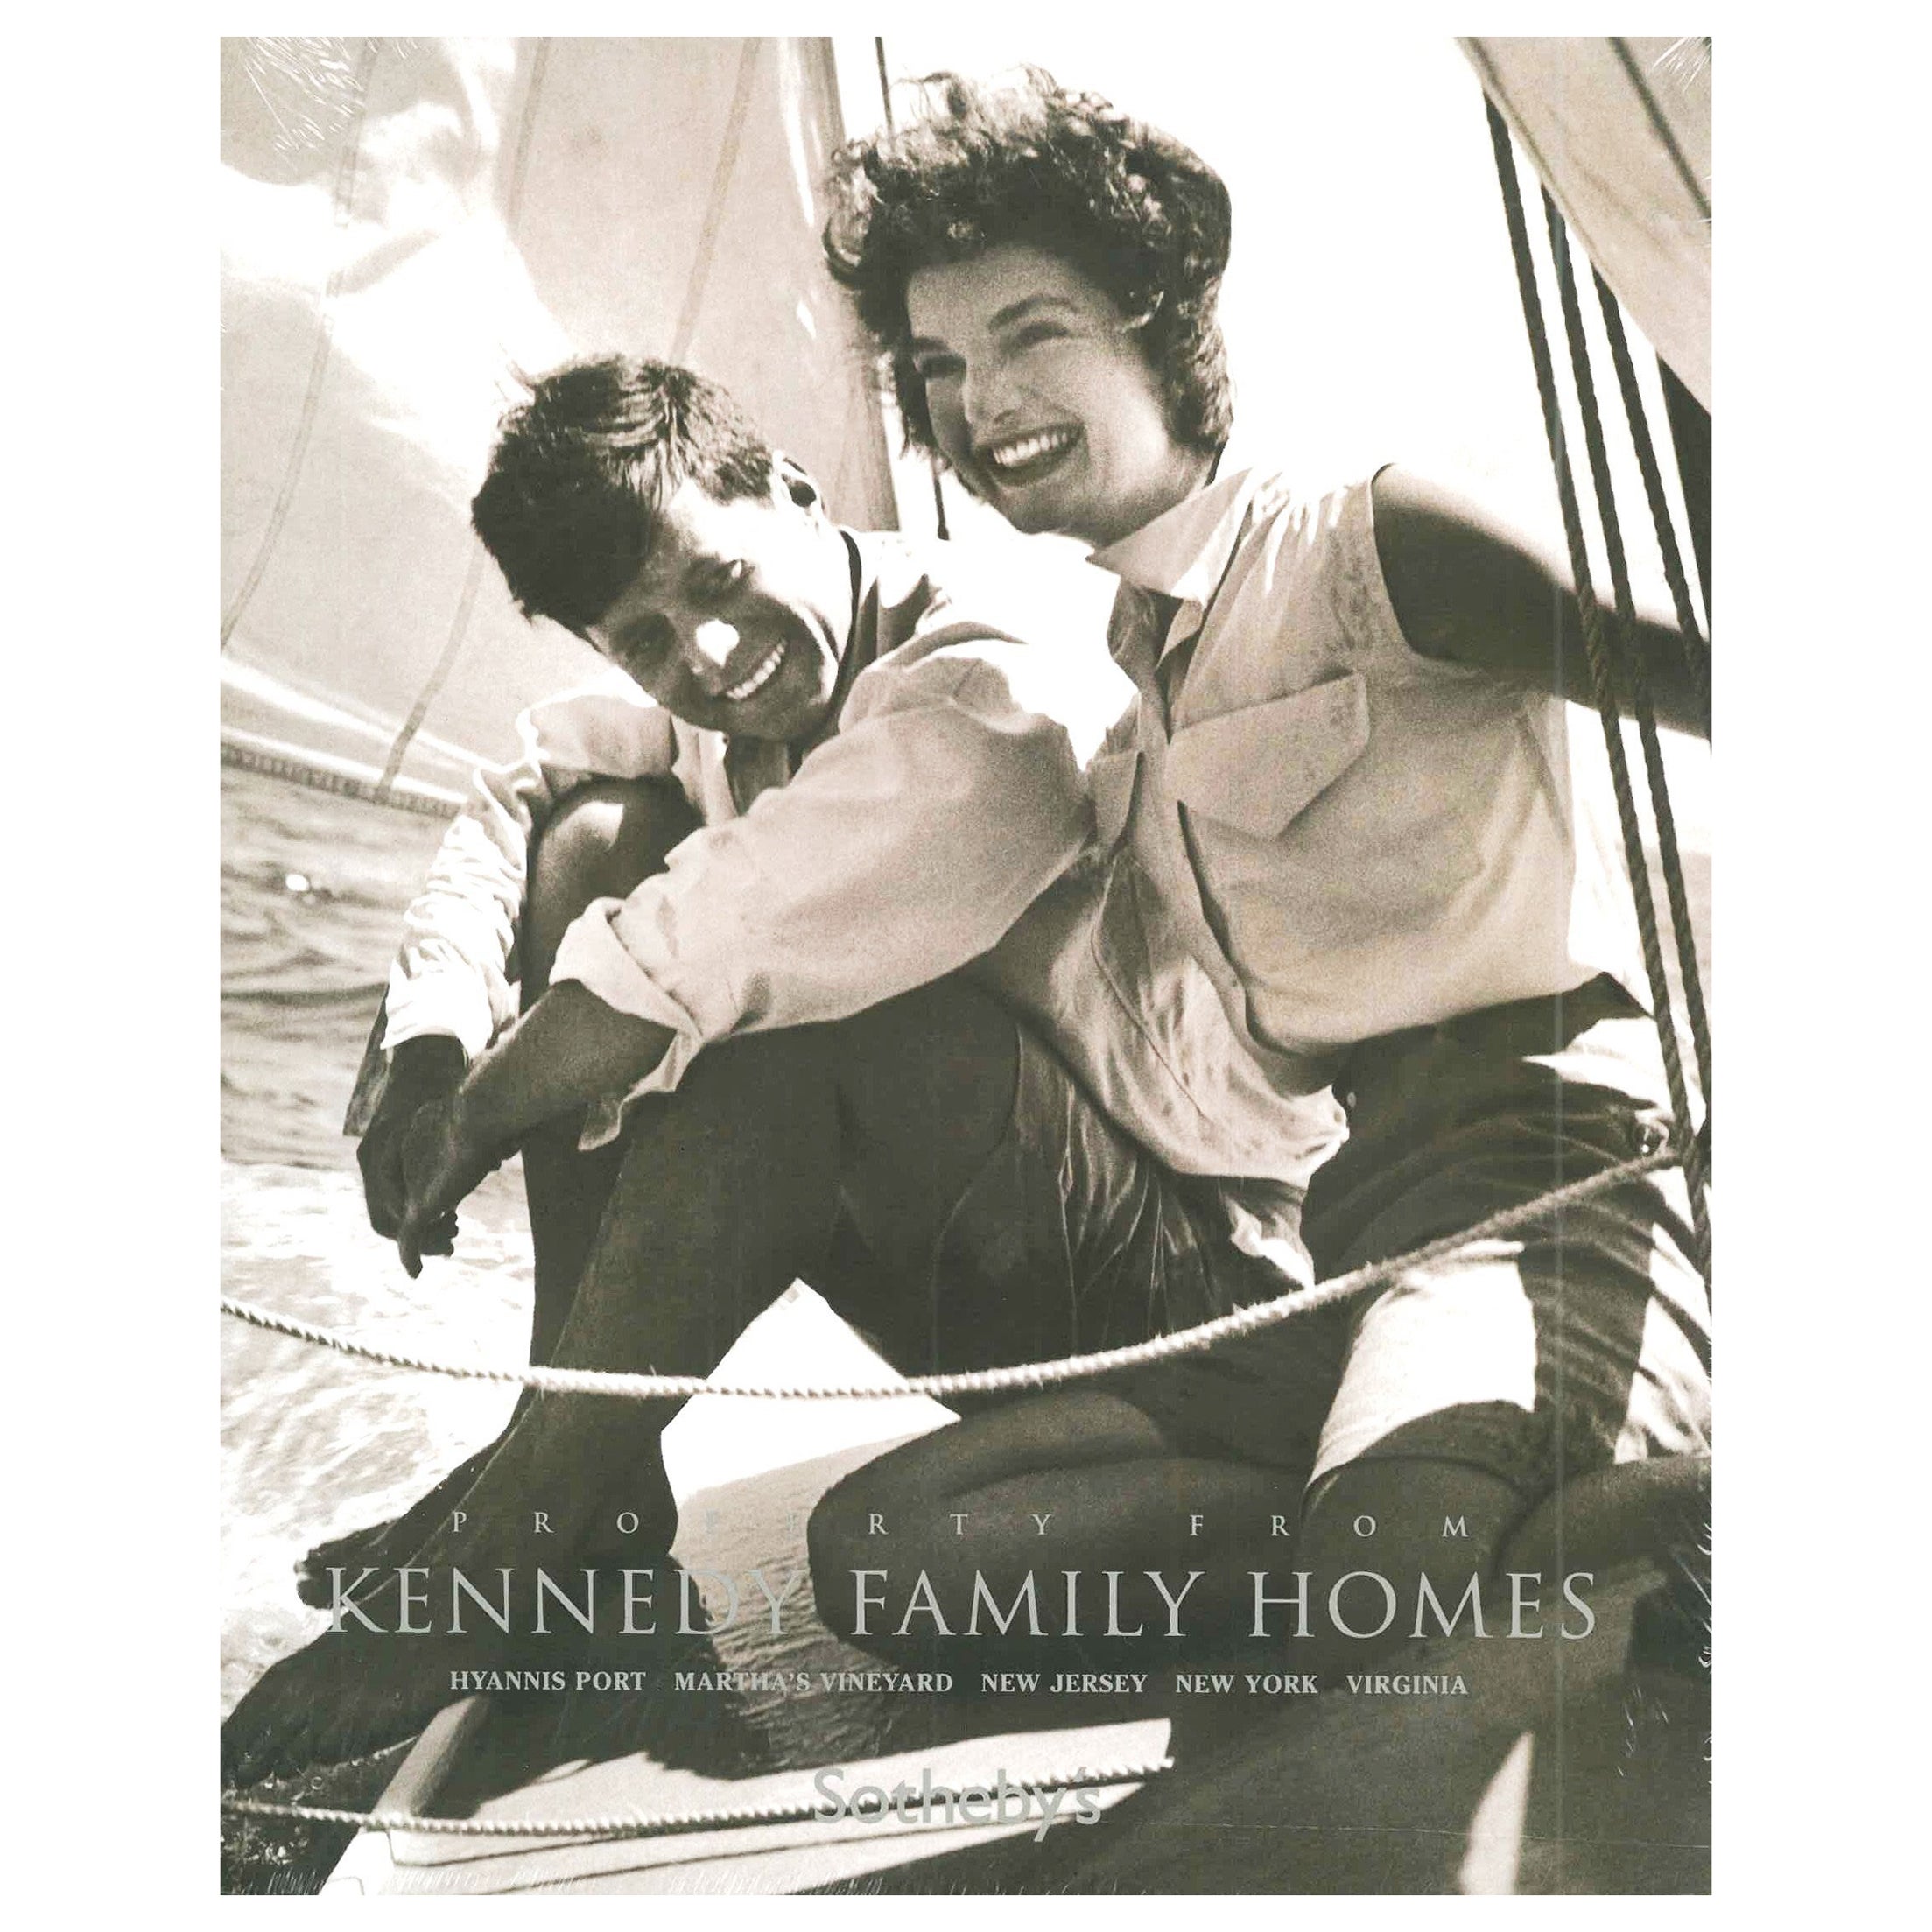 Property from Kennedy Family Homes, Sotheby's 2005 (Book)